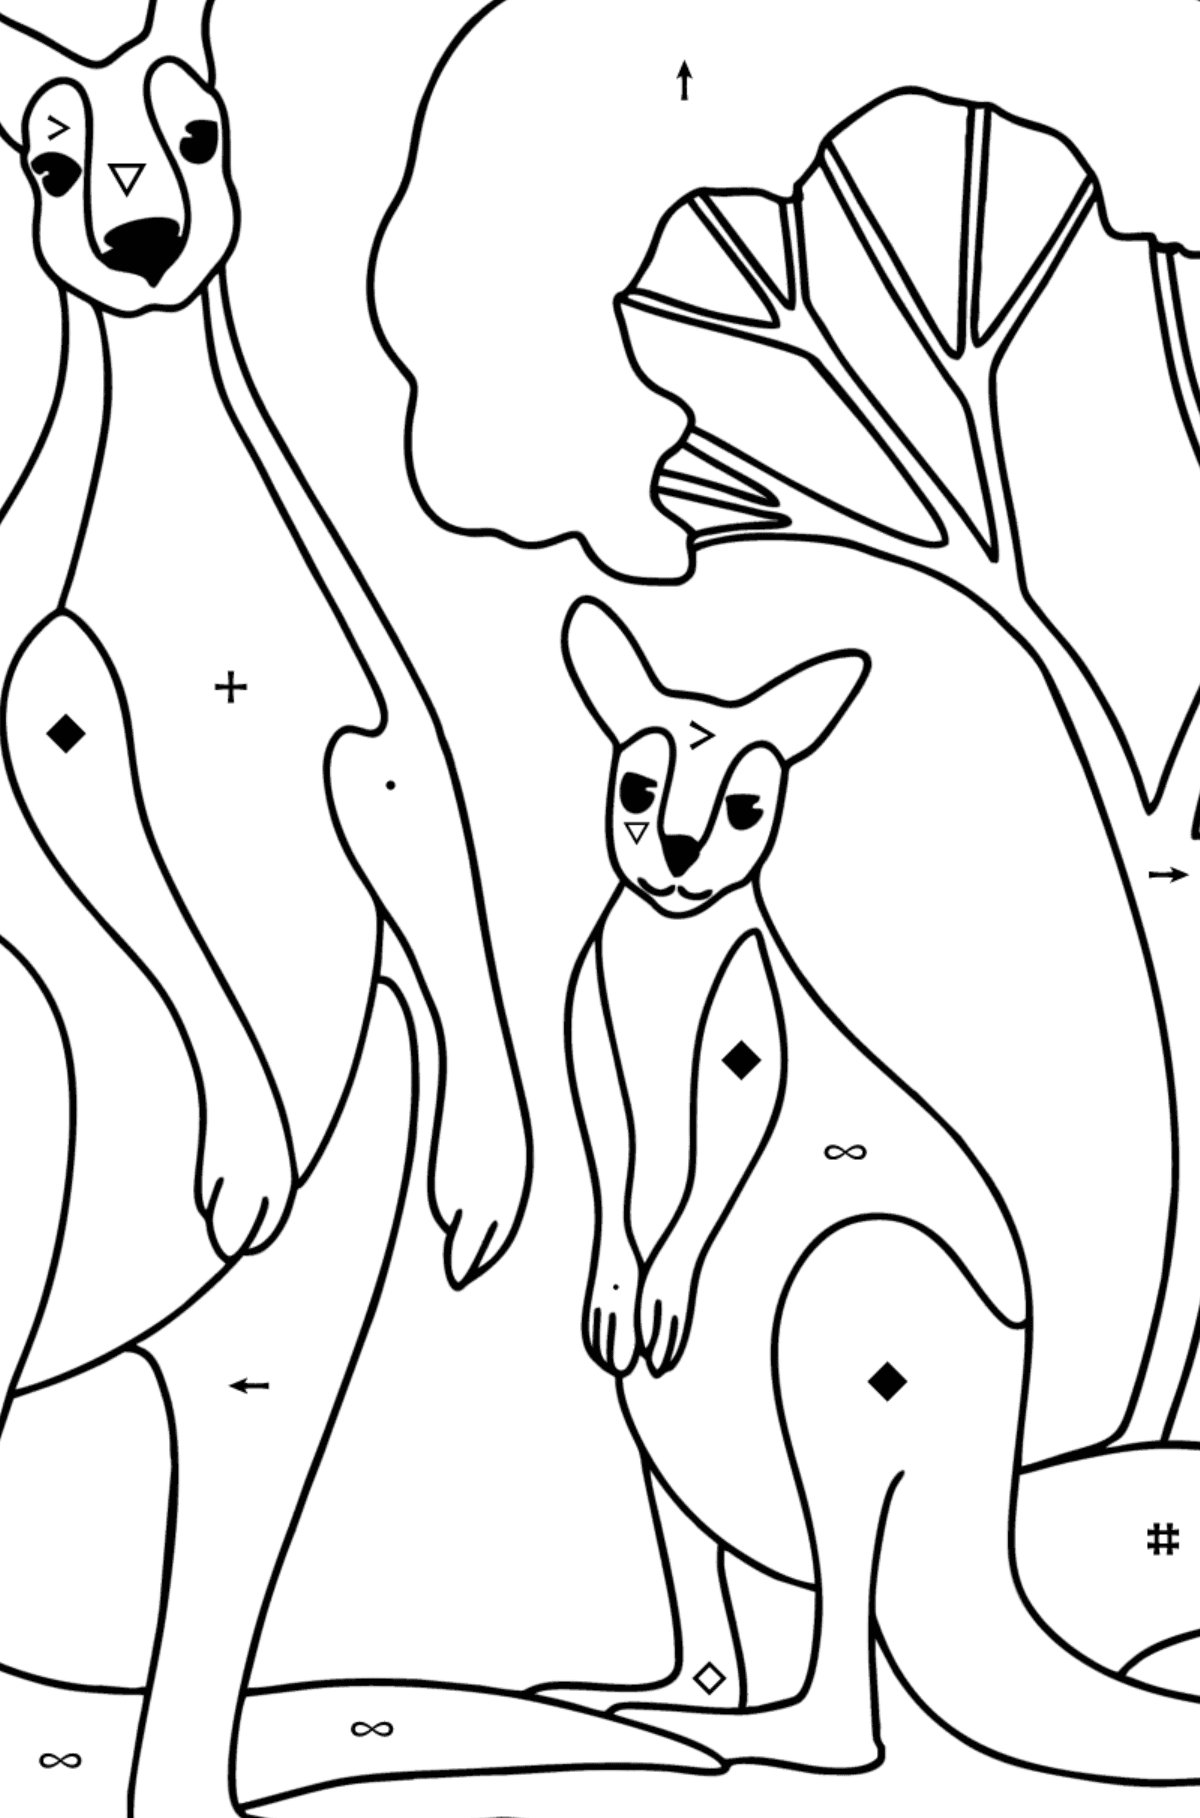 Kangaroo with Baby Coloring Page - Coloring by Symbols for Kids